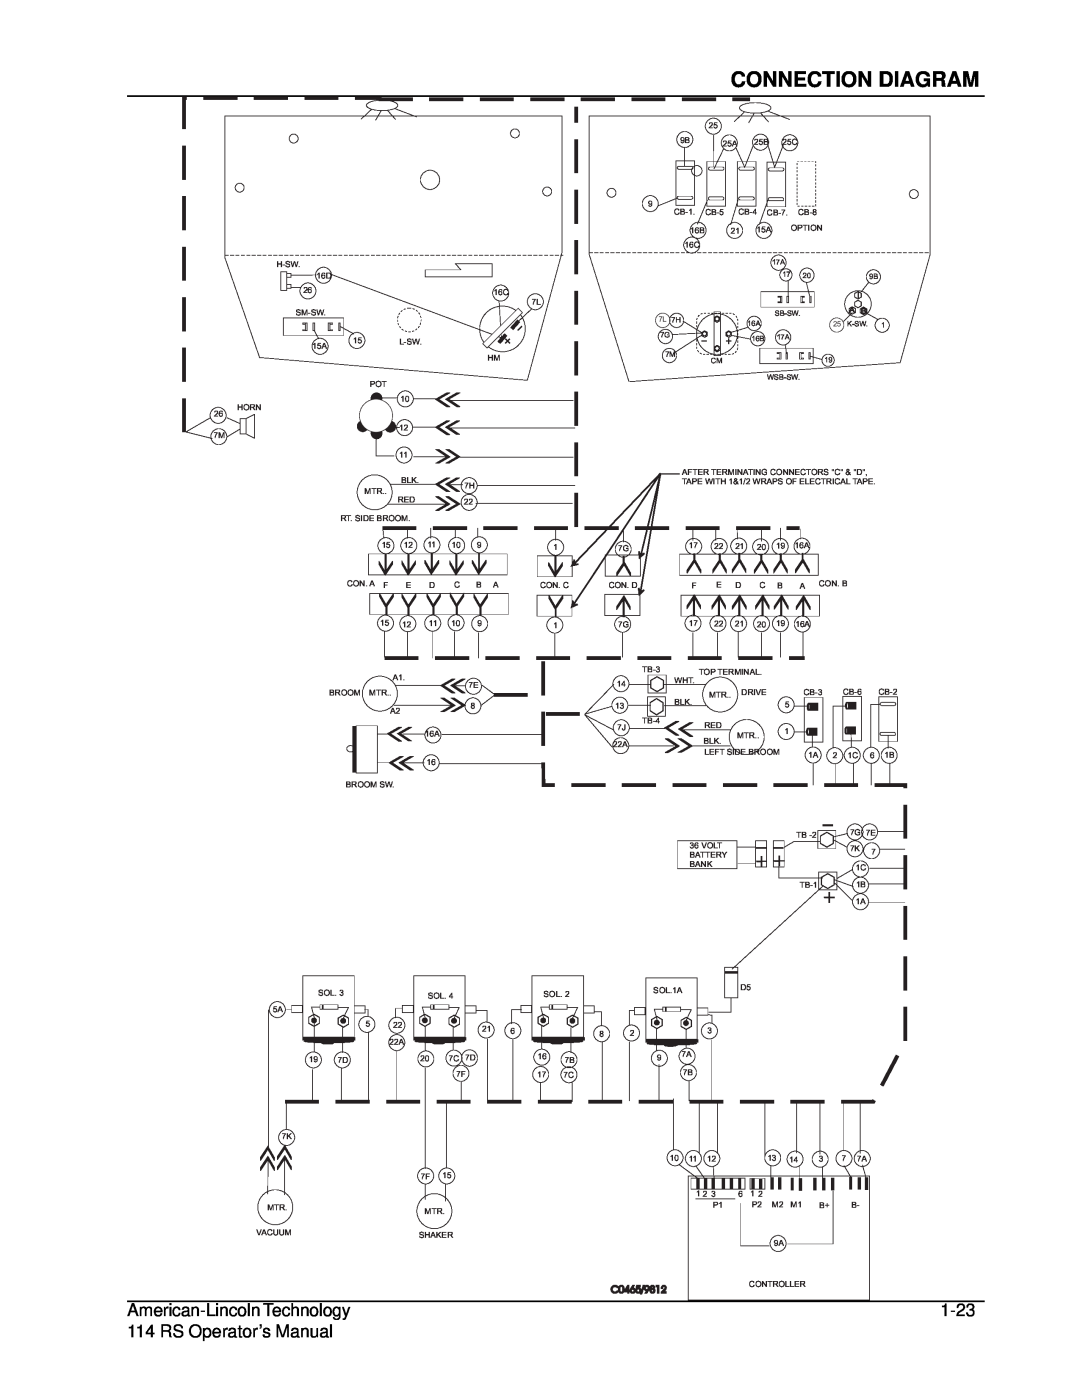 Nilfisk-ALTO 114RS SWEEPER manual Connection Diagram, American-LincolnTechnology, 1-23, RS Operator’s Manual, C0465/9812 